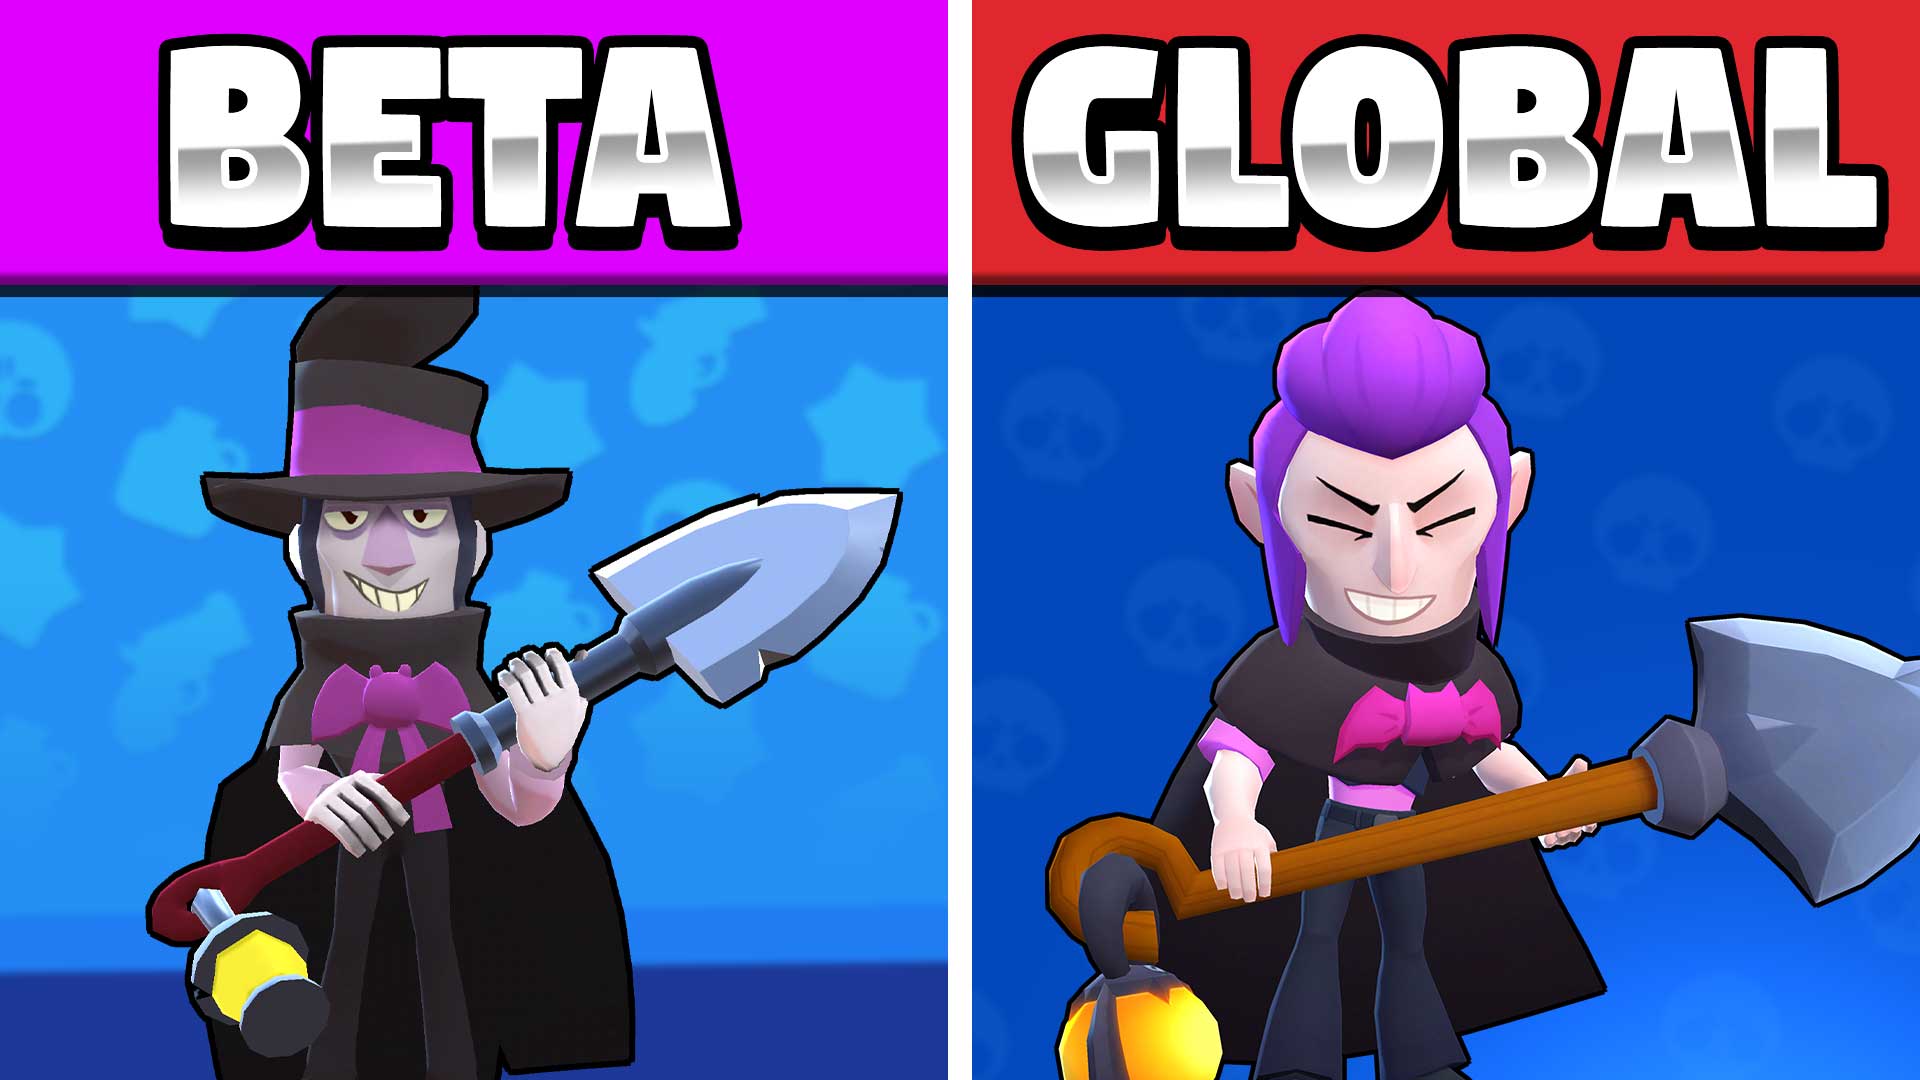 Lex On Twitter Are You A True Brawlstars Fan See If You Can Make It Through This Interactive Brawl Stars Quiz If You Are The Very First To Make It Through You